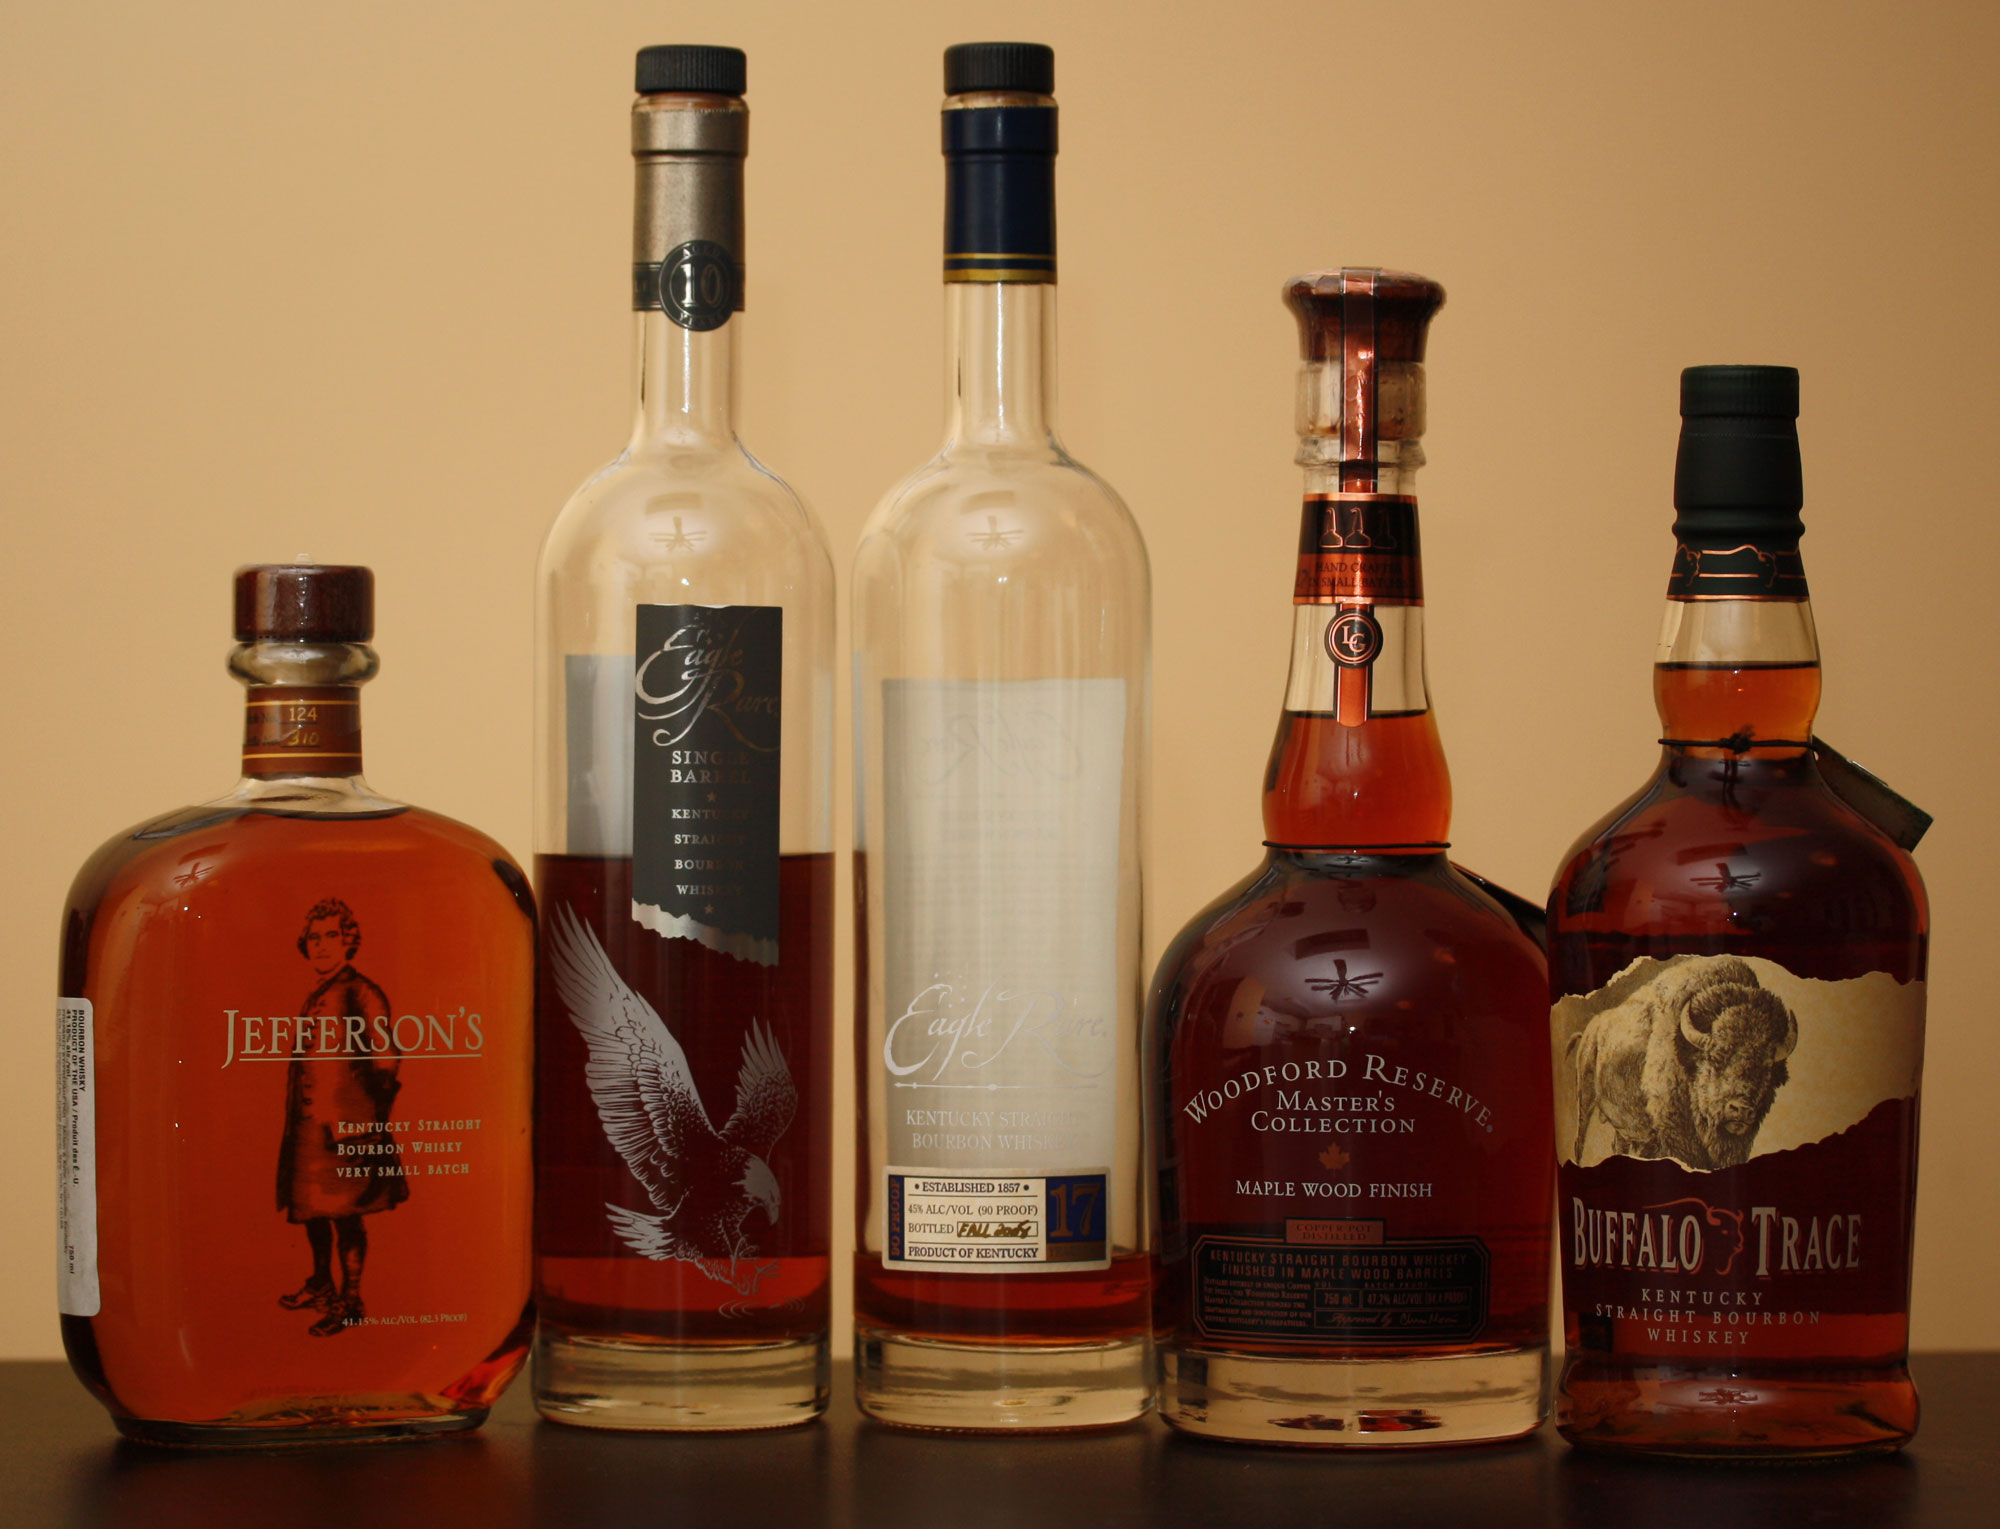 Photograph of a row of bottles of bourbon. The photo shows five bottles of bourbon of a range of shapes and heights, with varying amounts of bourbon left in them. The bourbon is orange-brown in color.